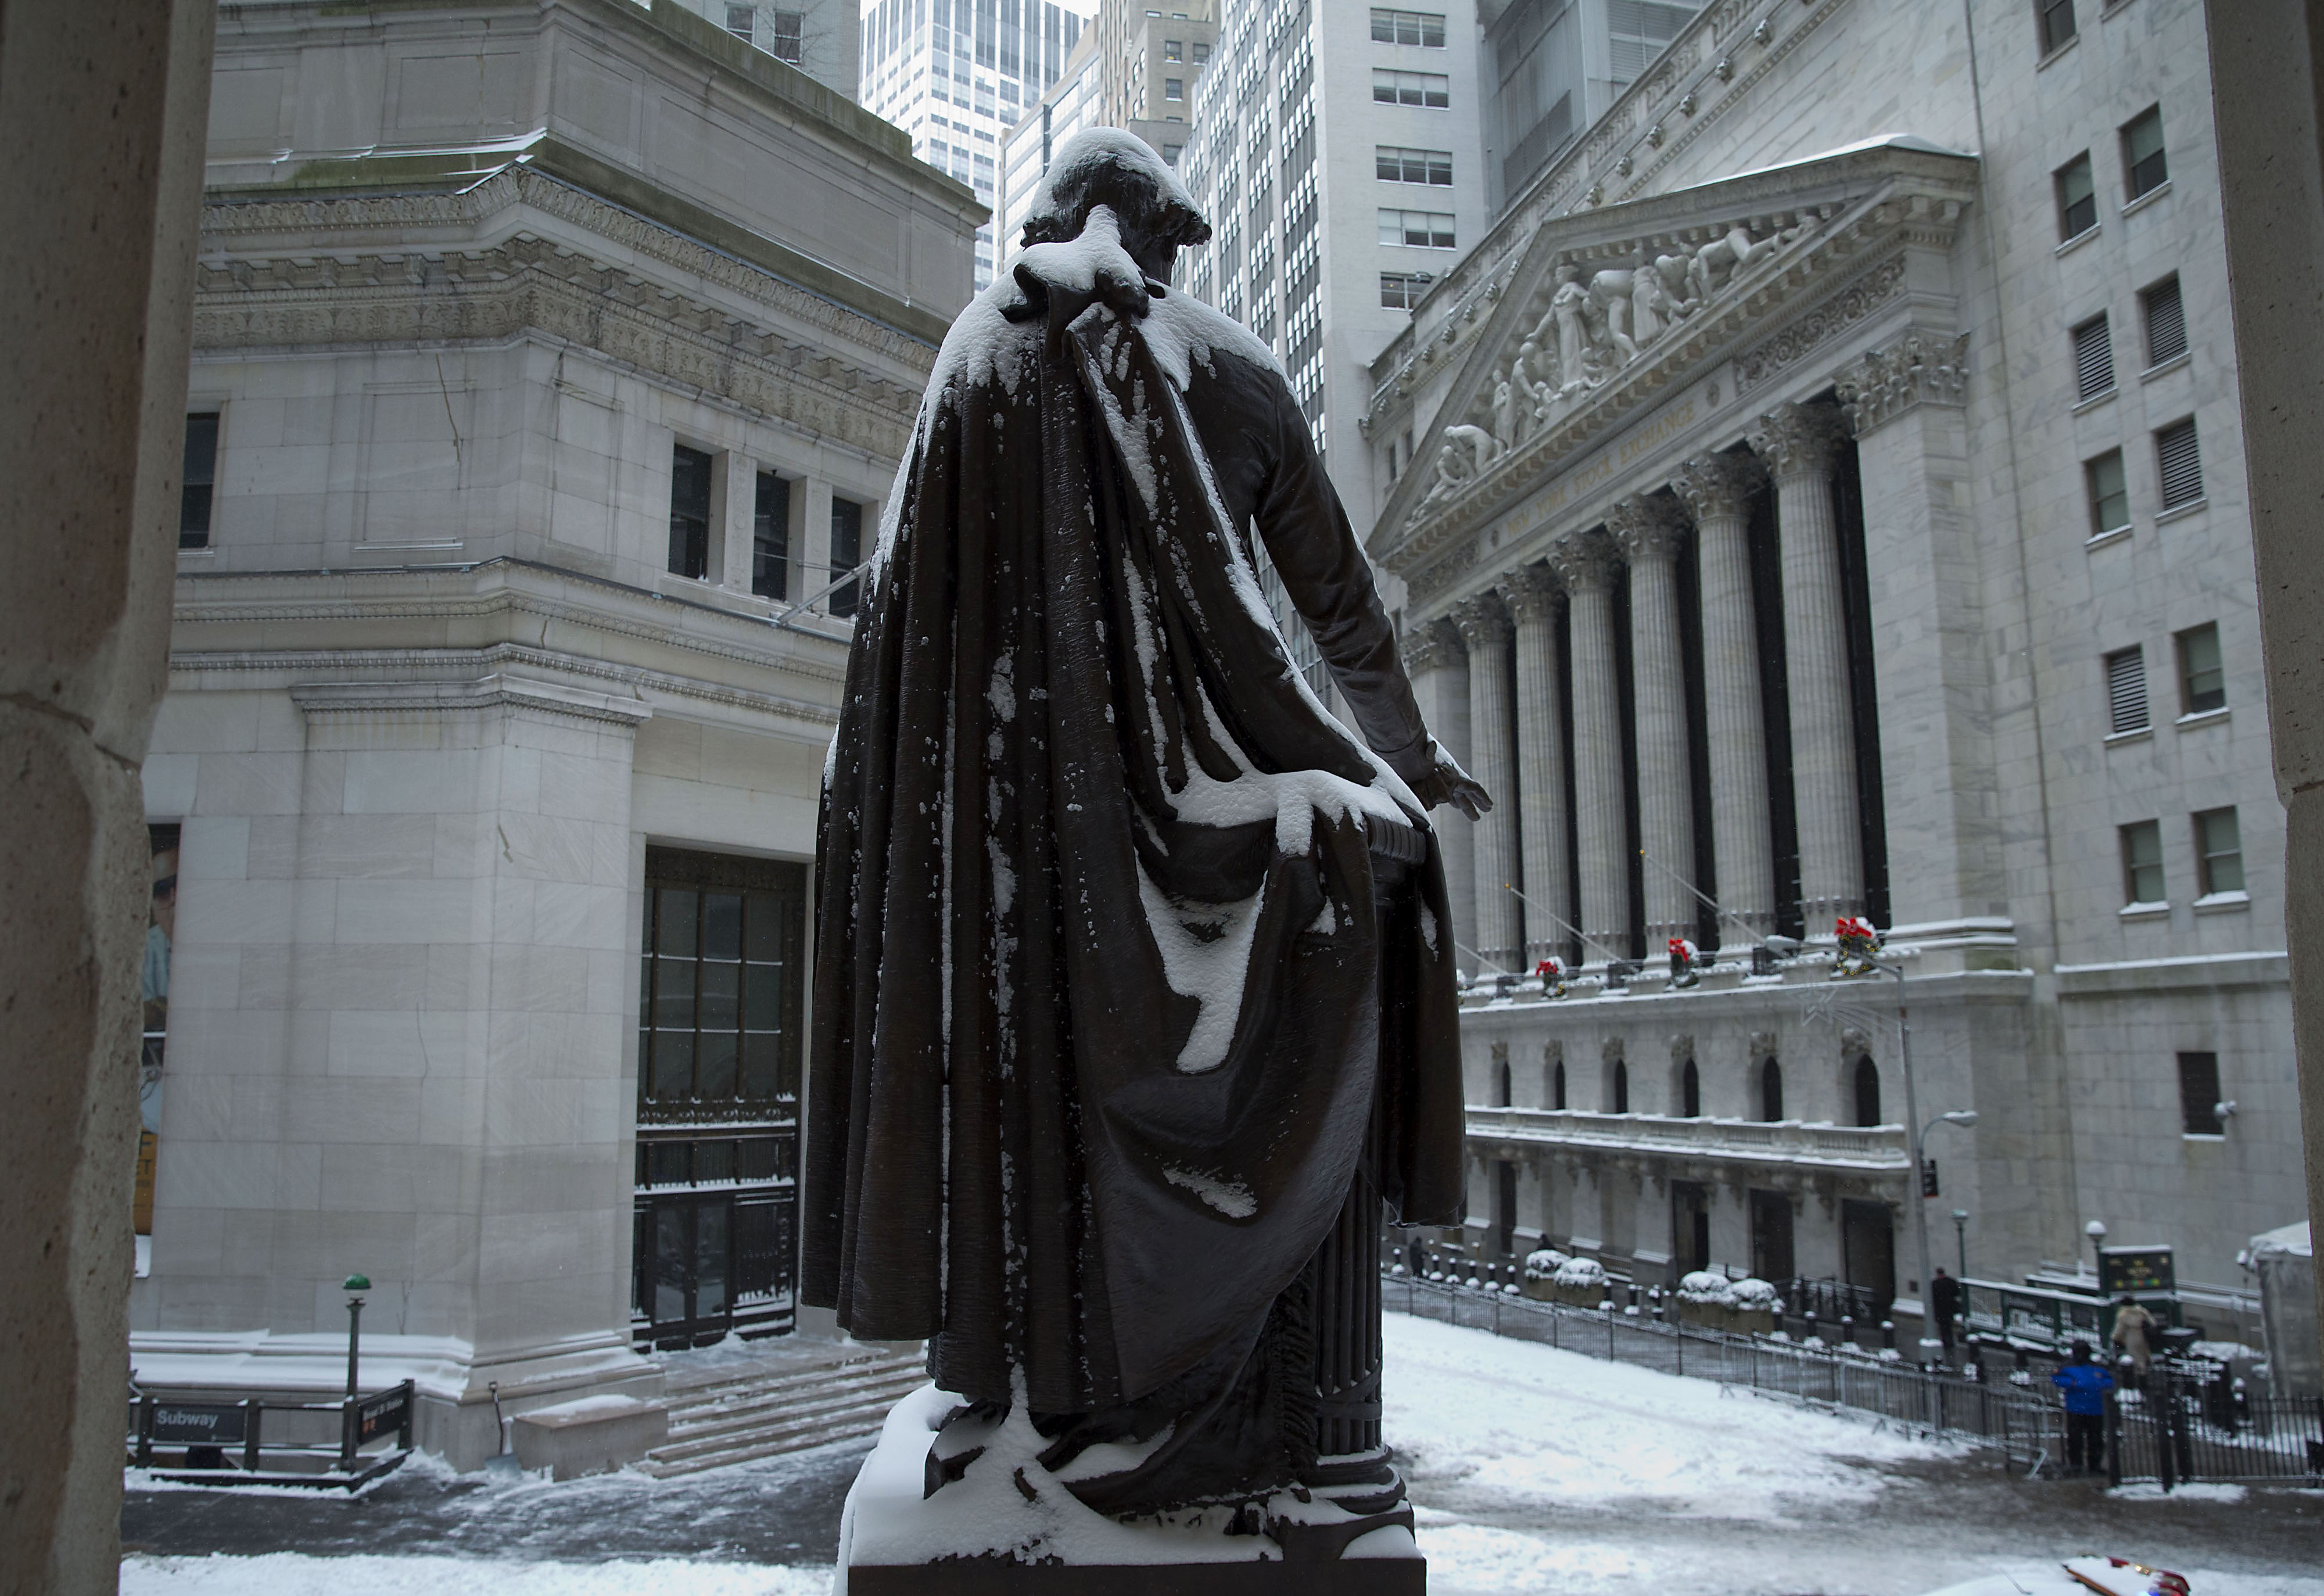 The George Washington statue stands covered in snow near the New York Stock Exchange (Jin Lee&mdash;Bloomberg via Getty Images)